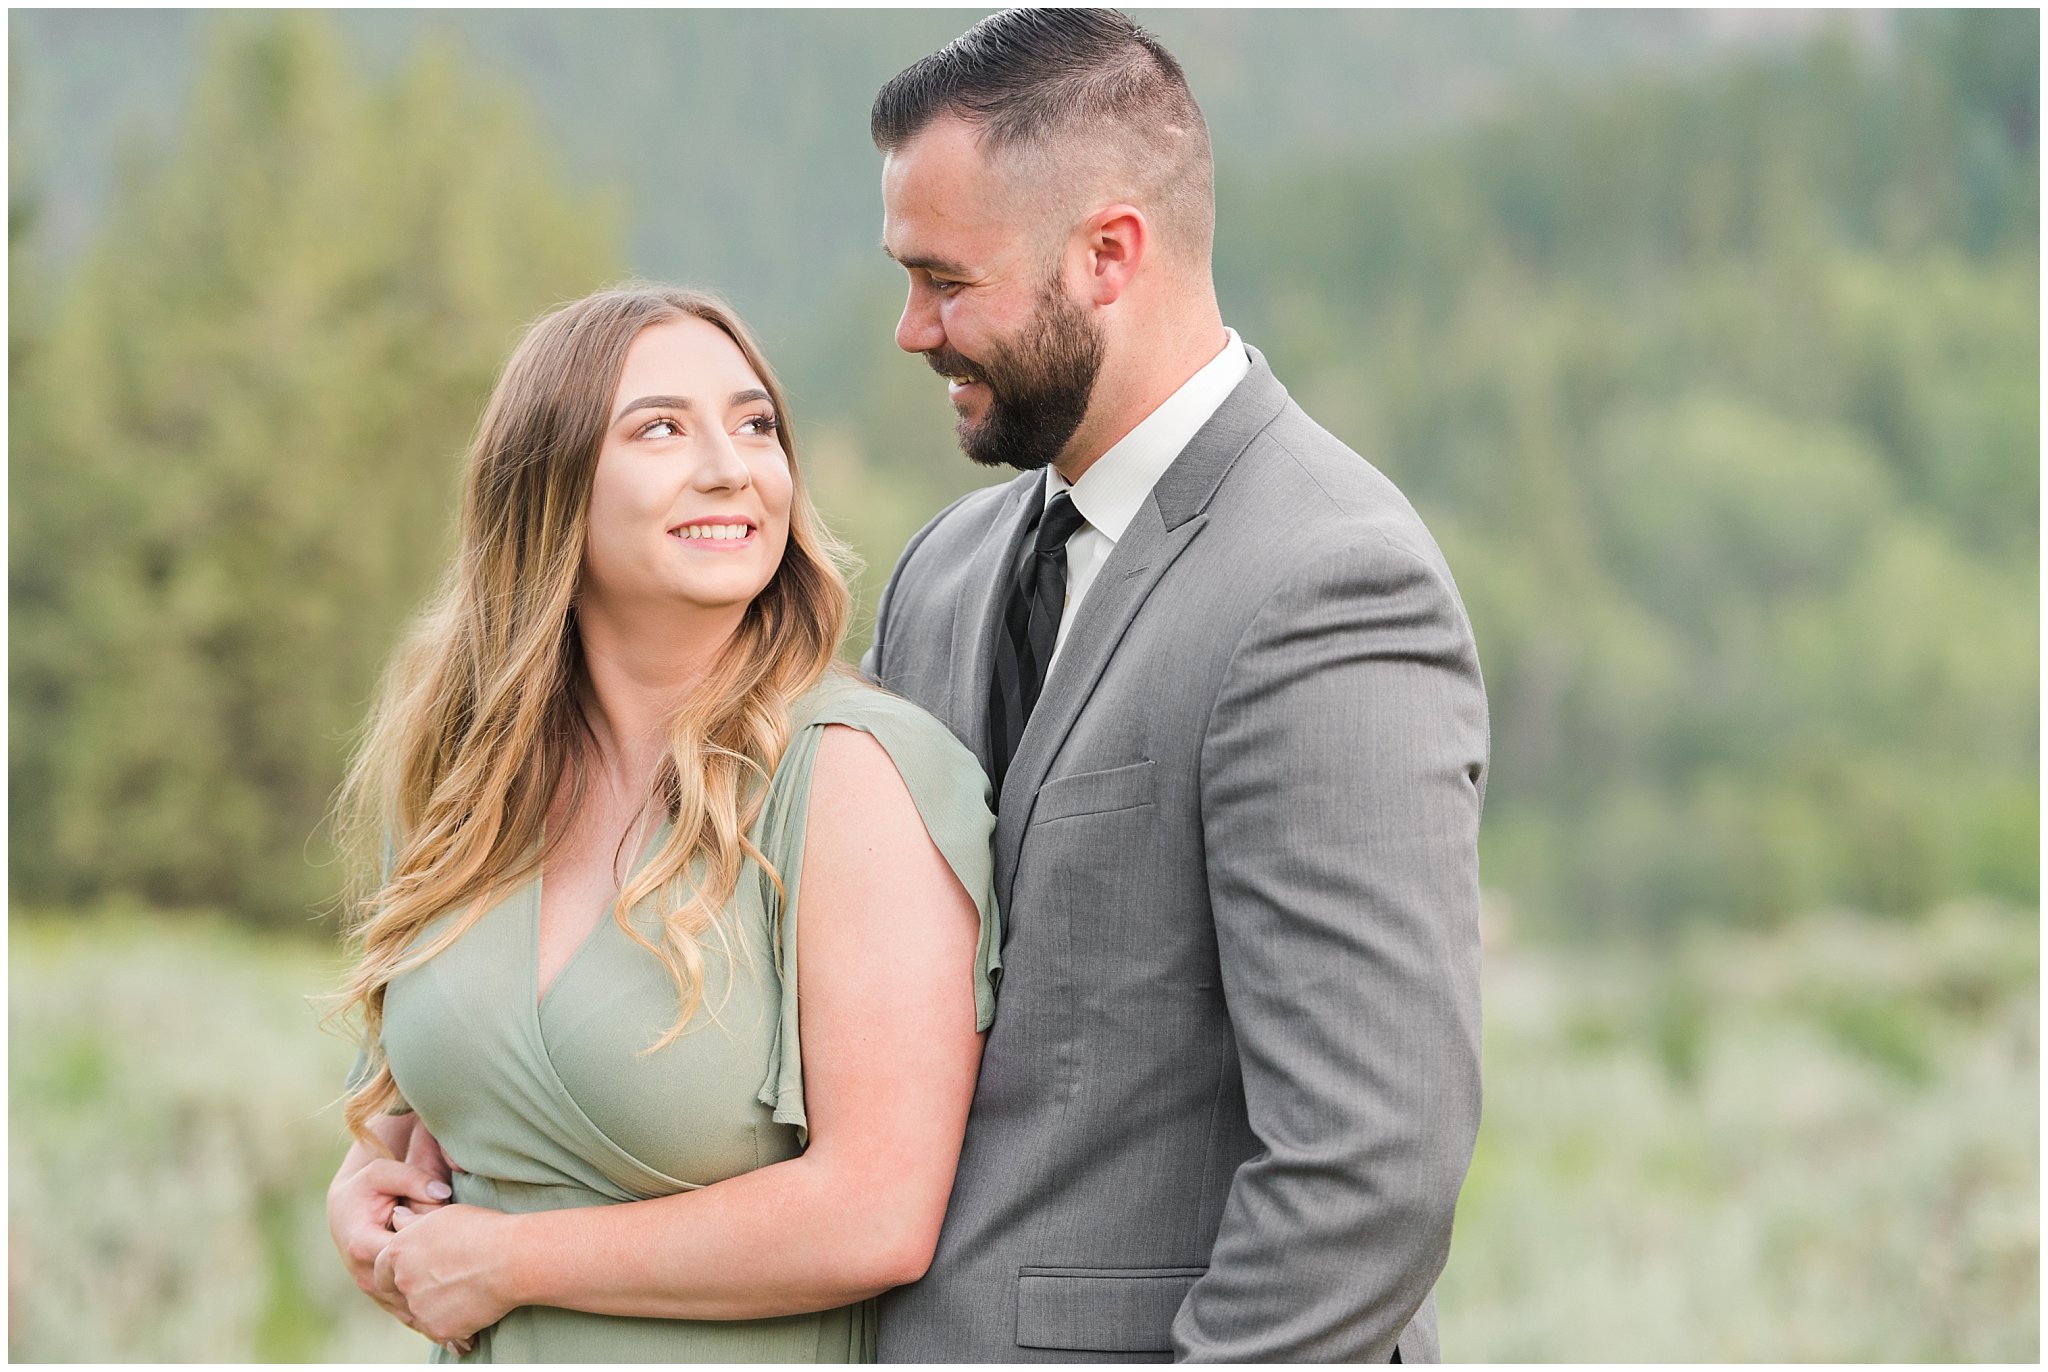 Couple in sage green dress and grey suit in the mountains | Tibble Fork Summer Engagement Session | Jessie and Dallin Photography